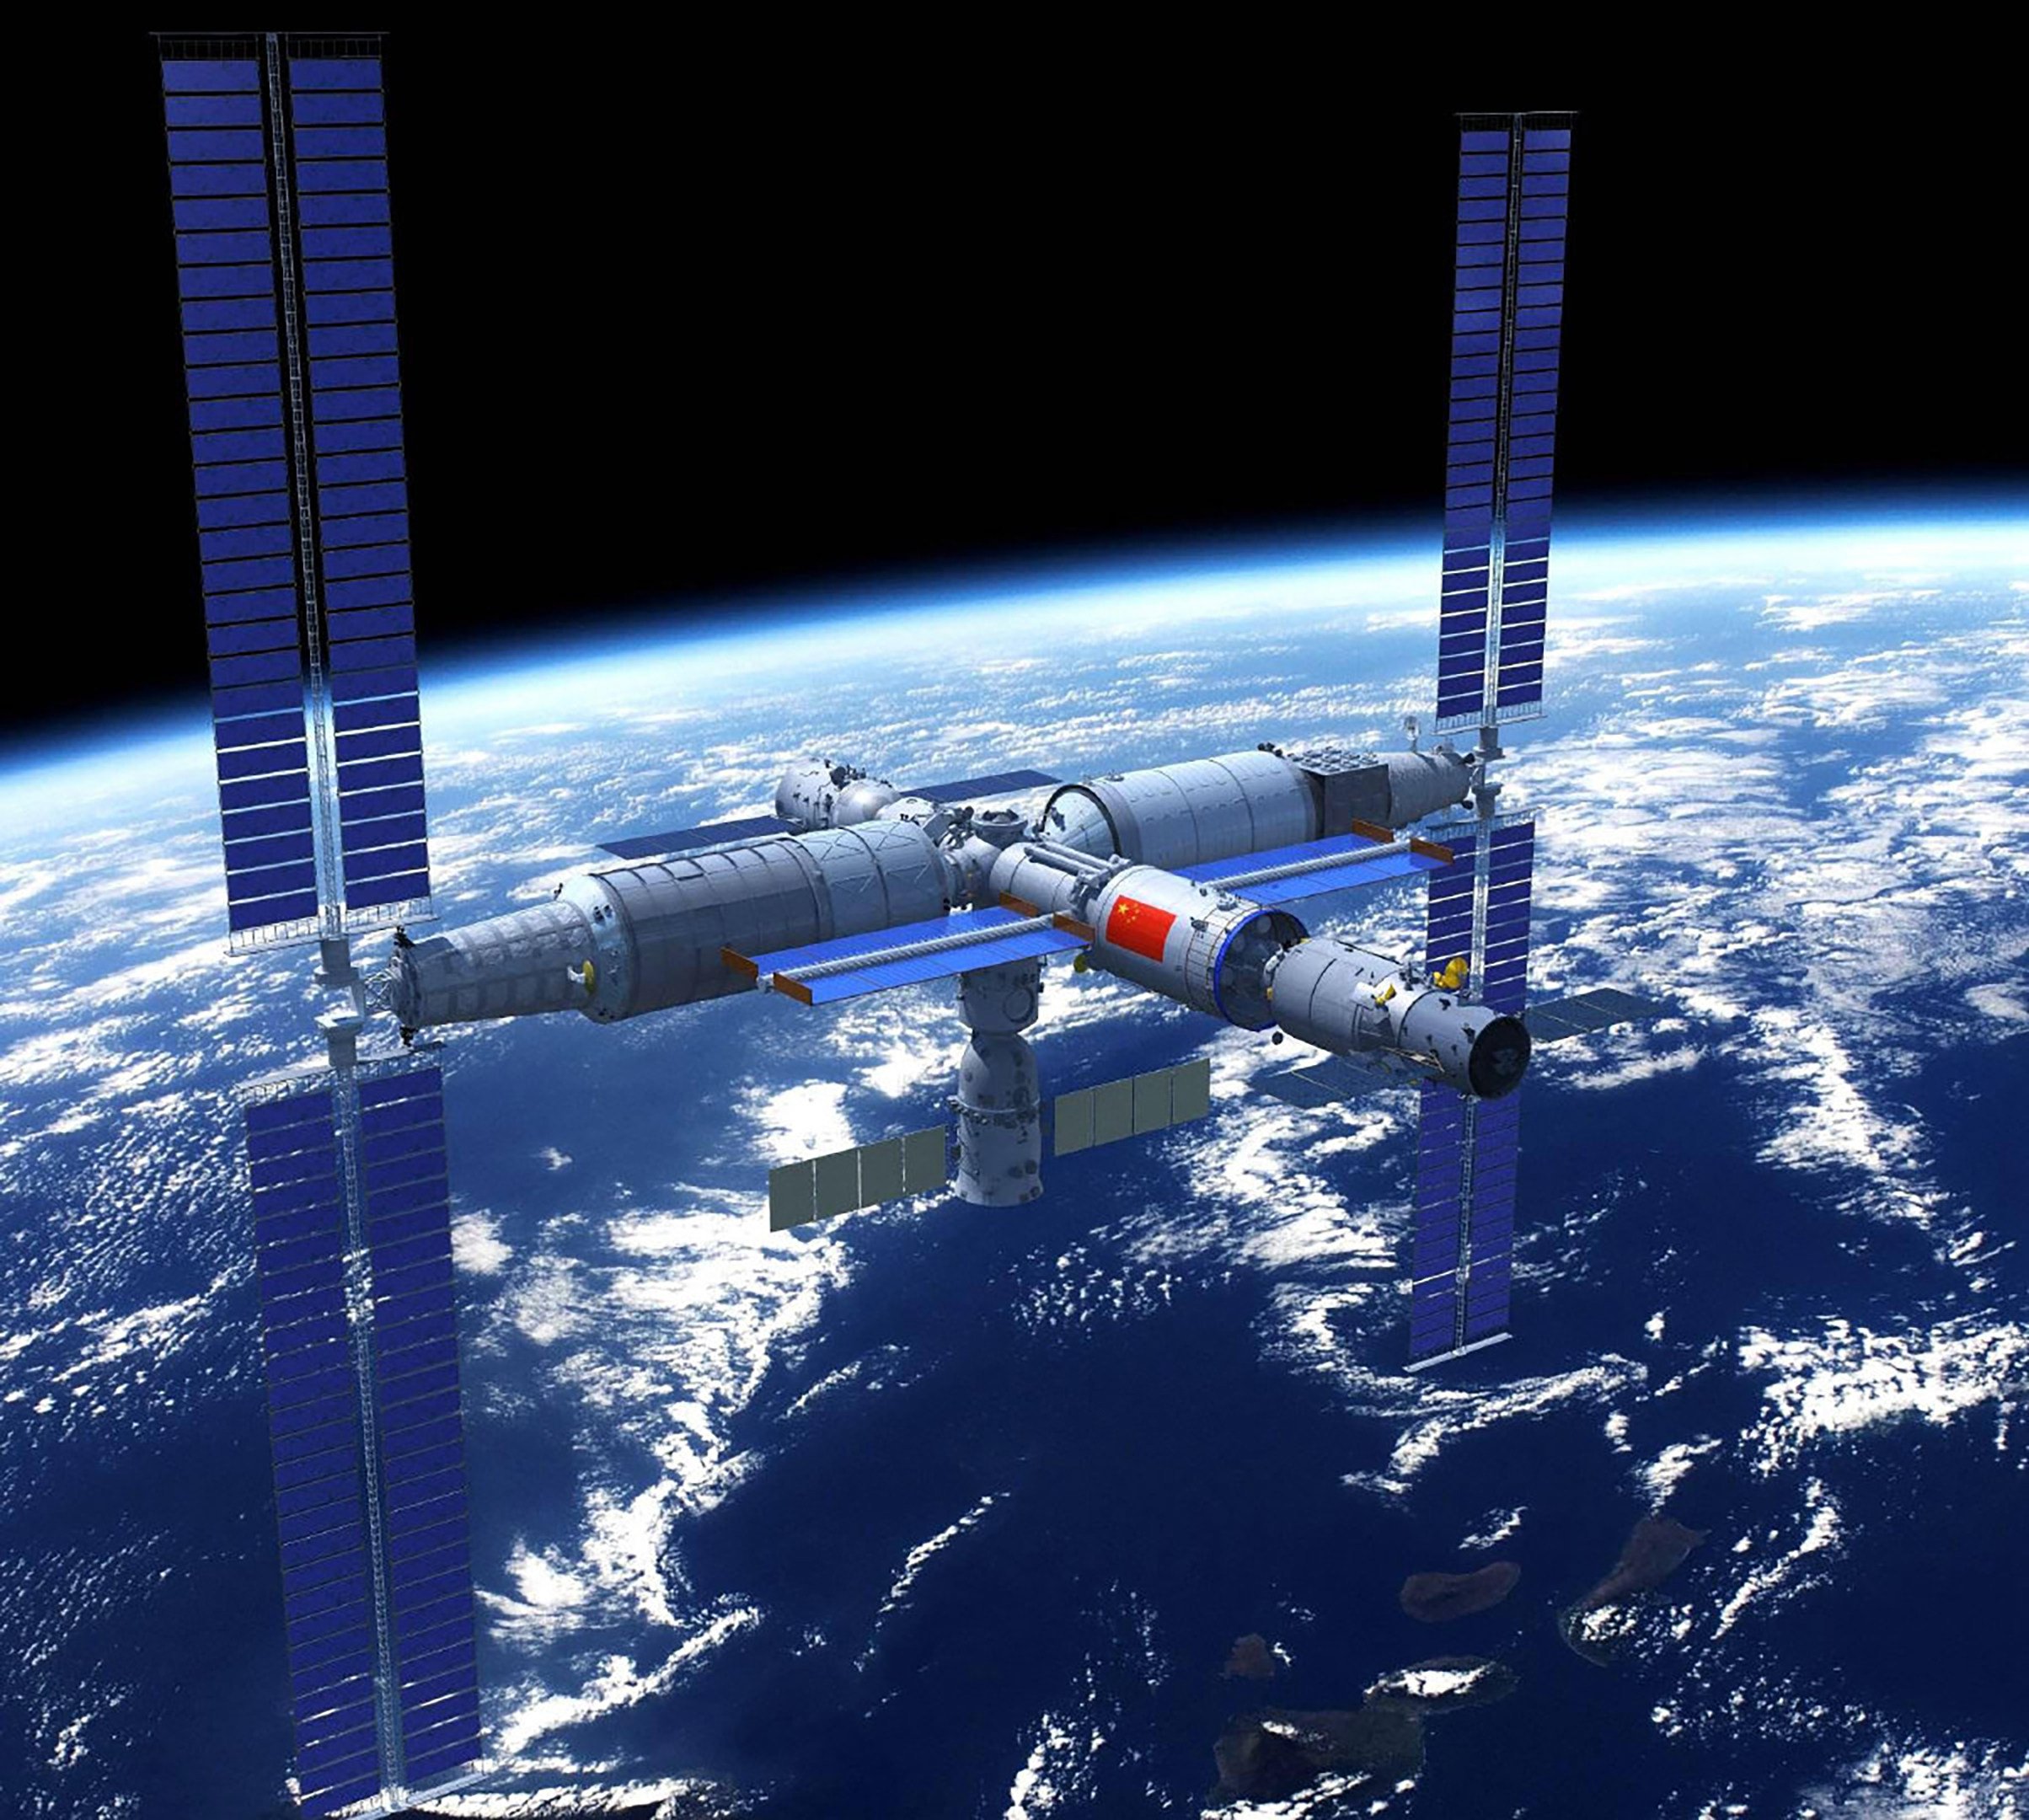 An artist’s impression of China’s Tiangong space station that will host the multinational Polar-2 telescope to capture data from gamma-ray bursts. Photo: Weibo